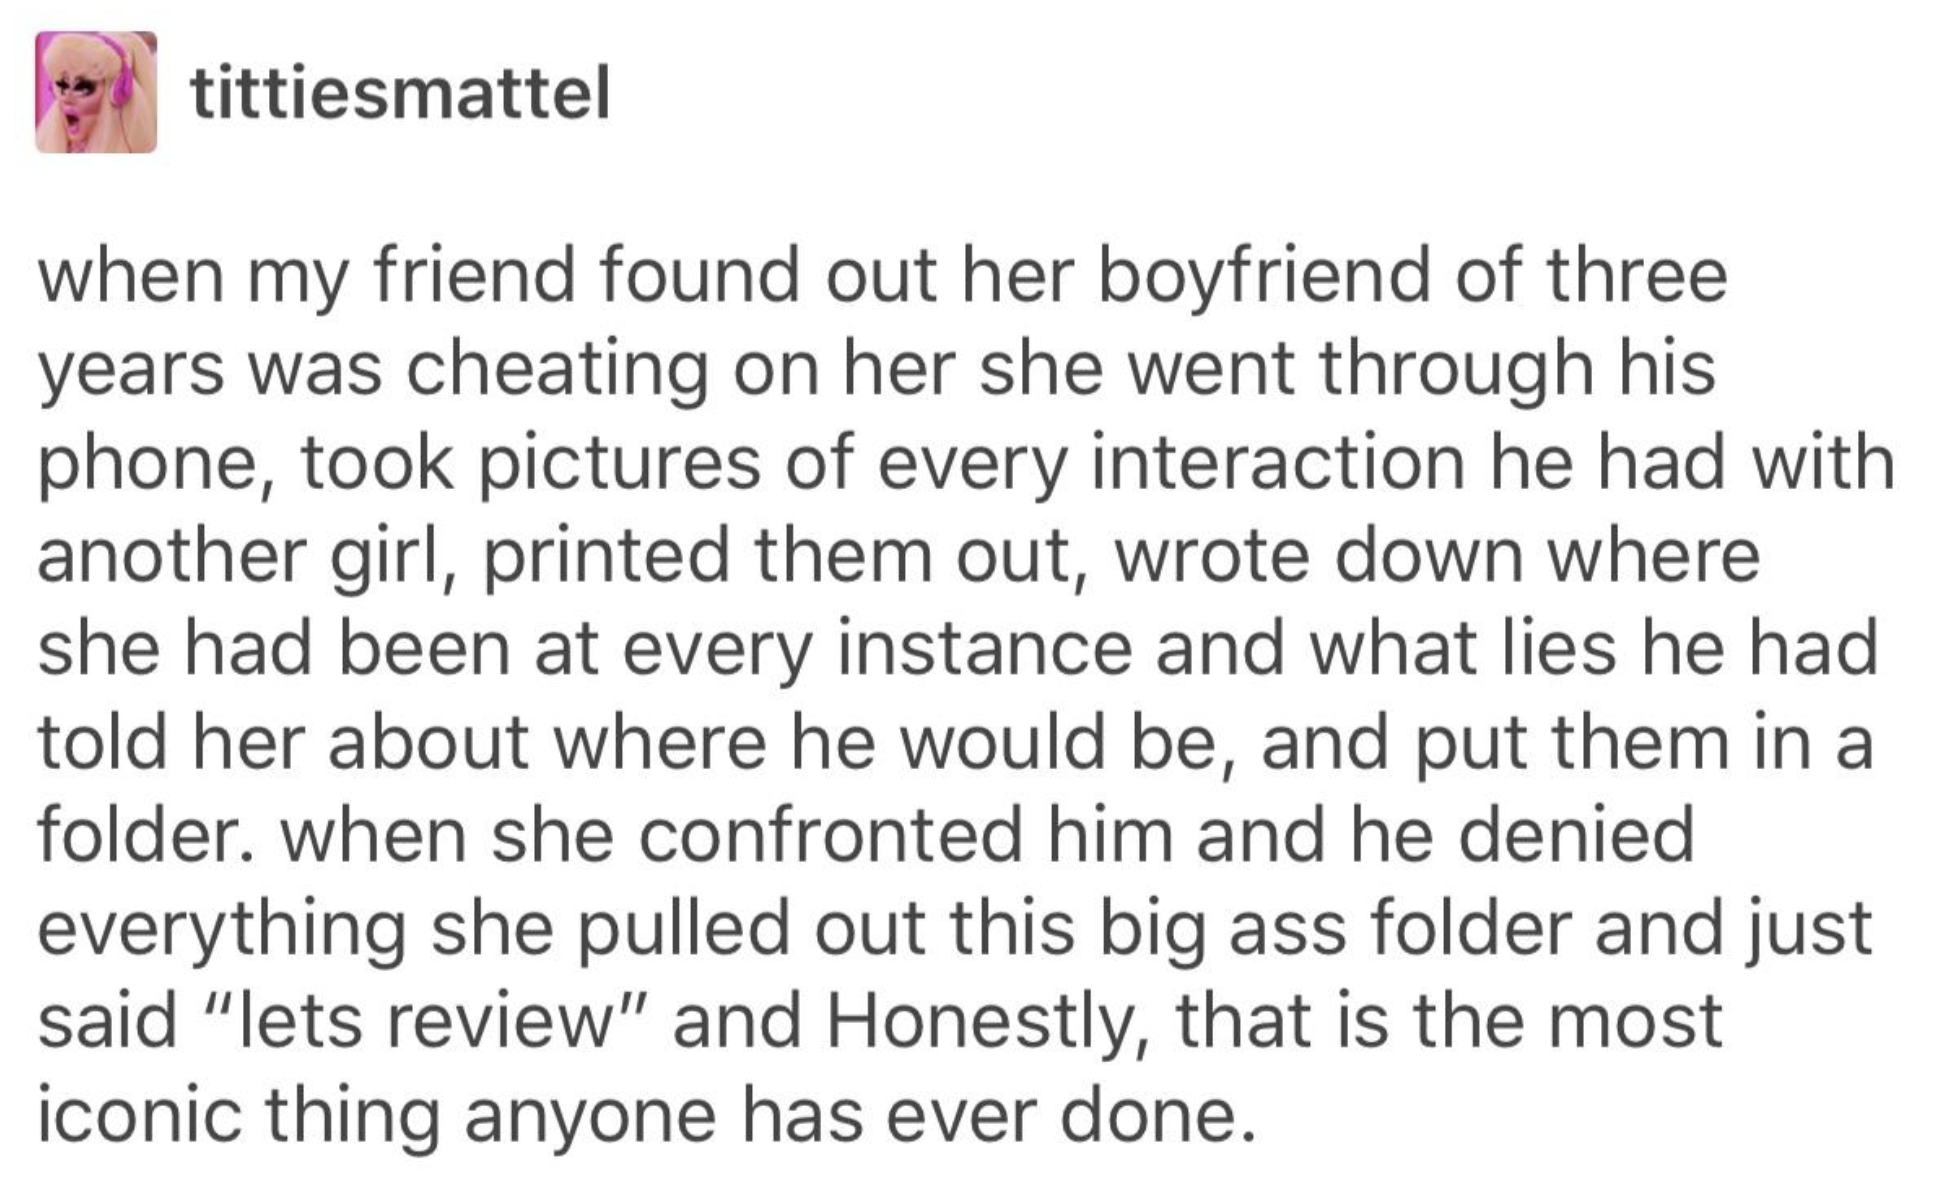 tumblr post about making a binder to prove someone was cheating